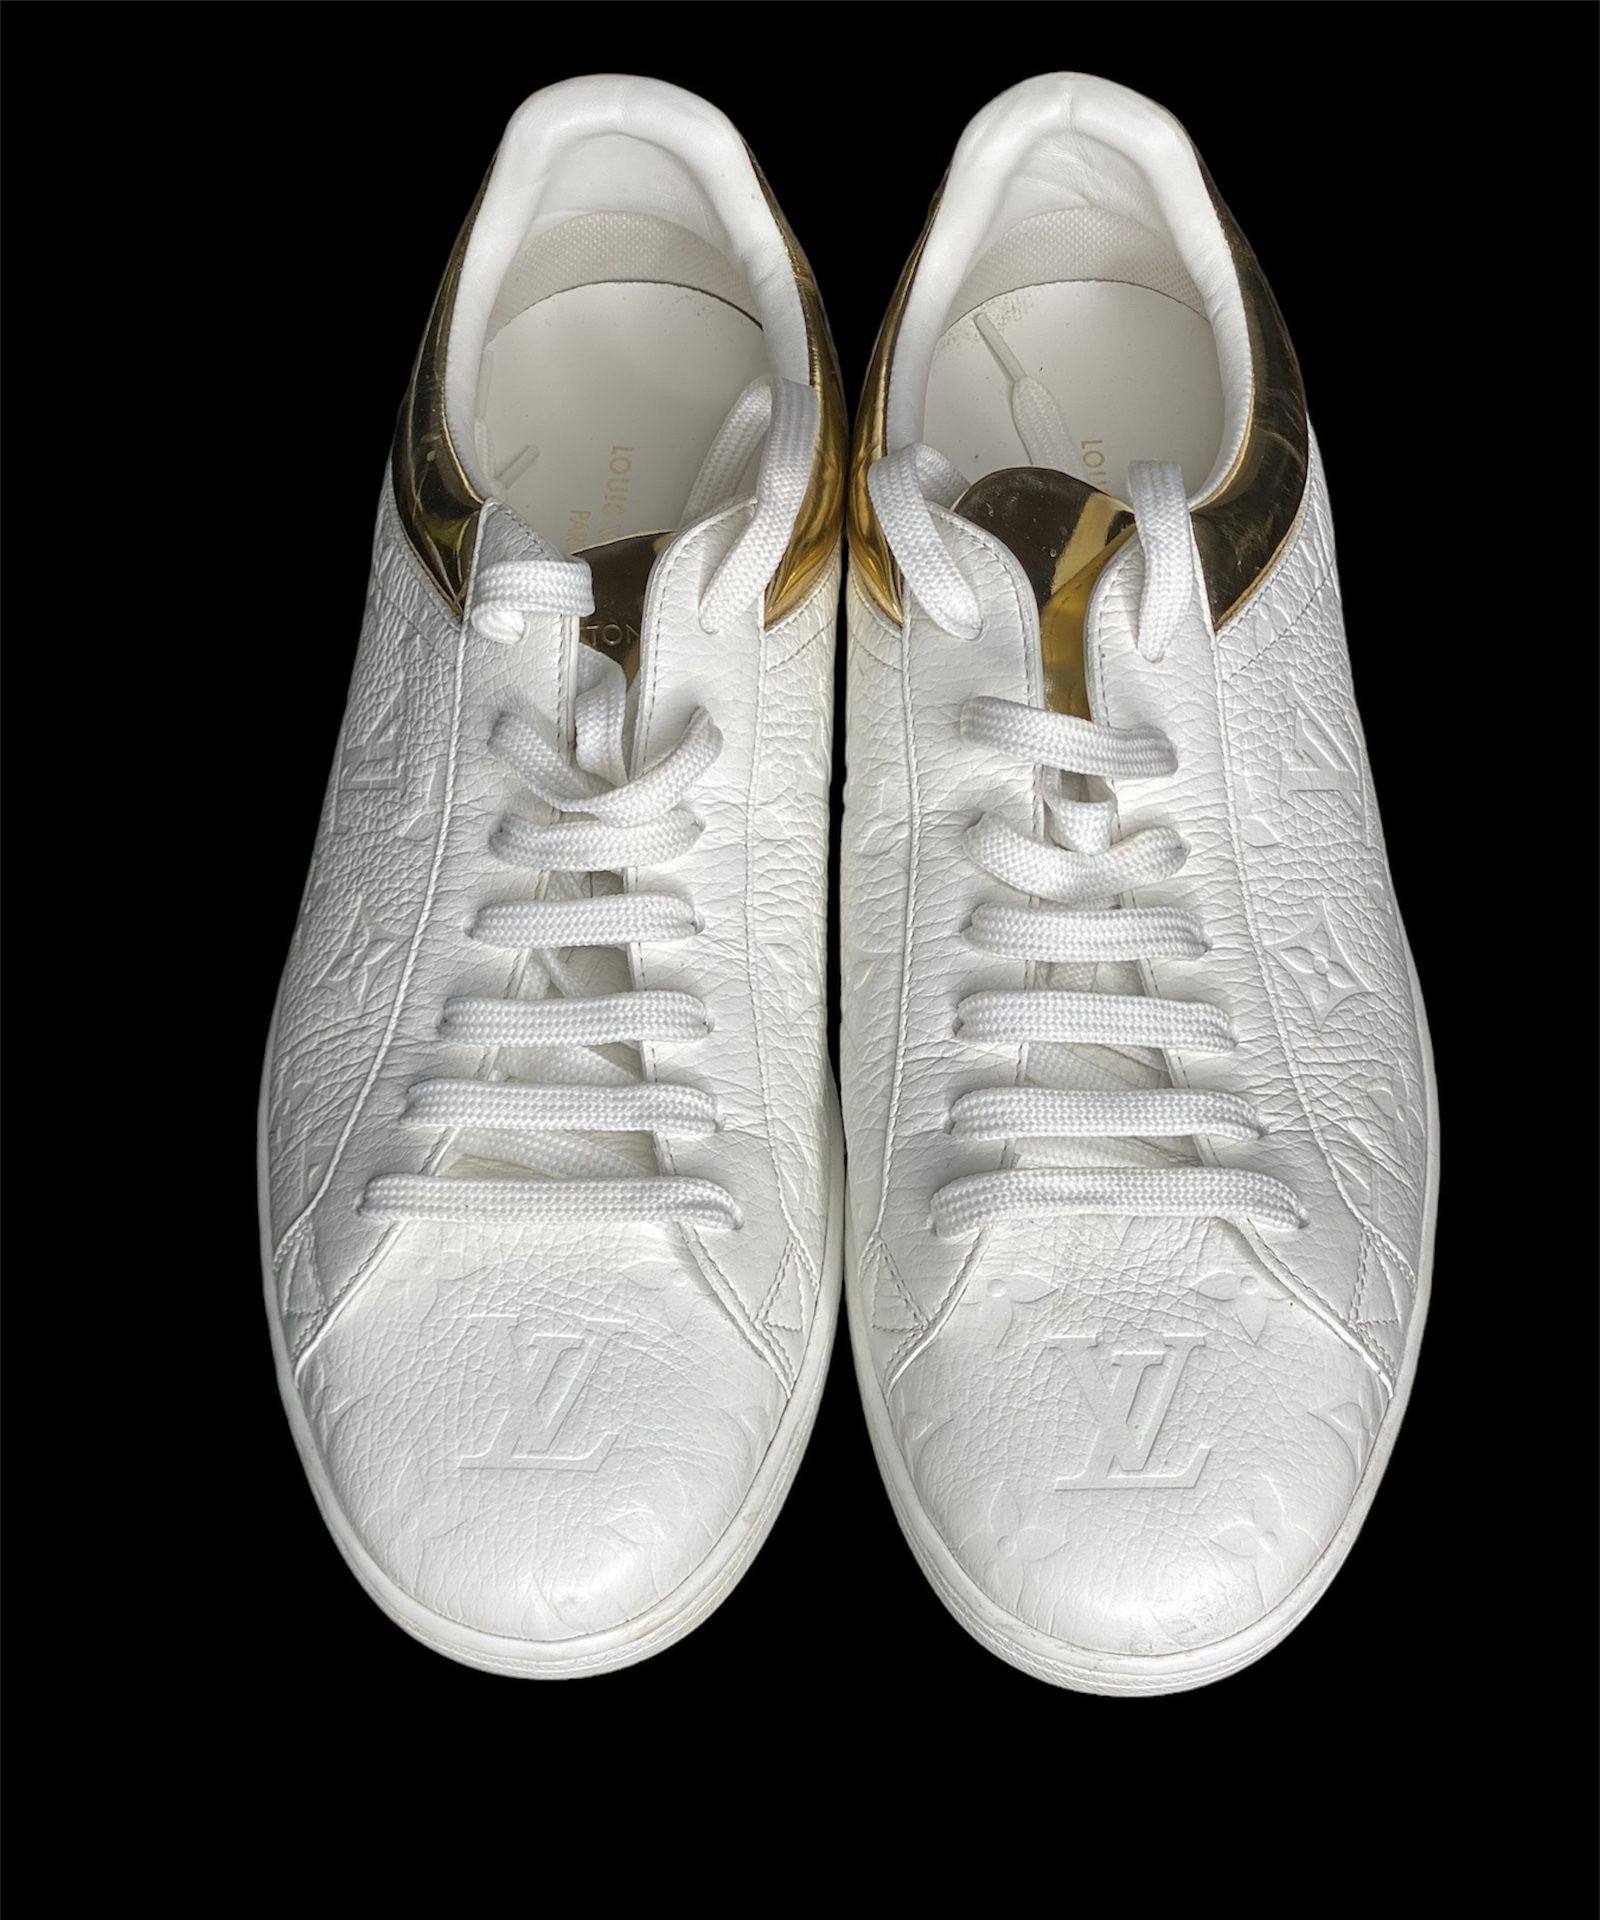 Louis Vuitton Sneakers in Central Division for sale ▷ Prices on